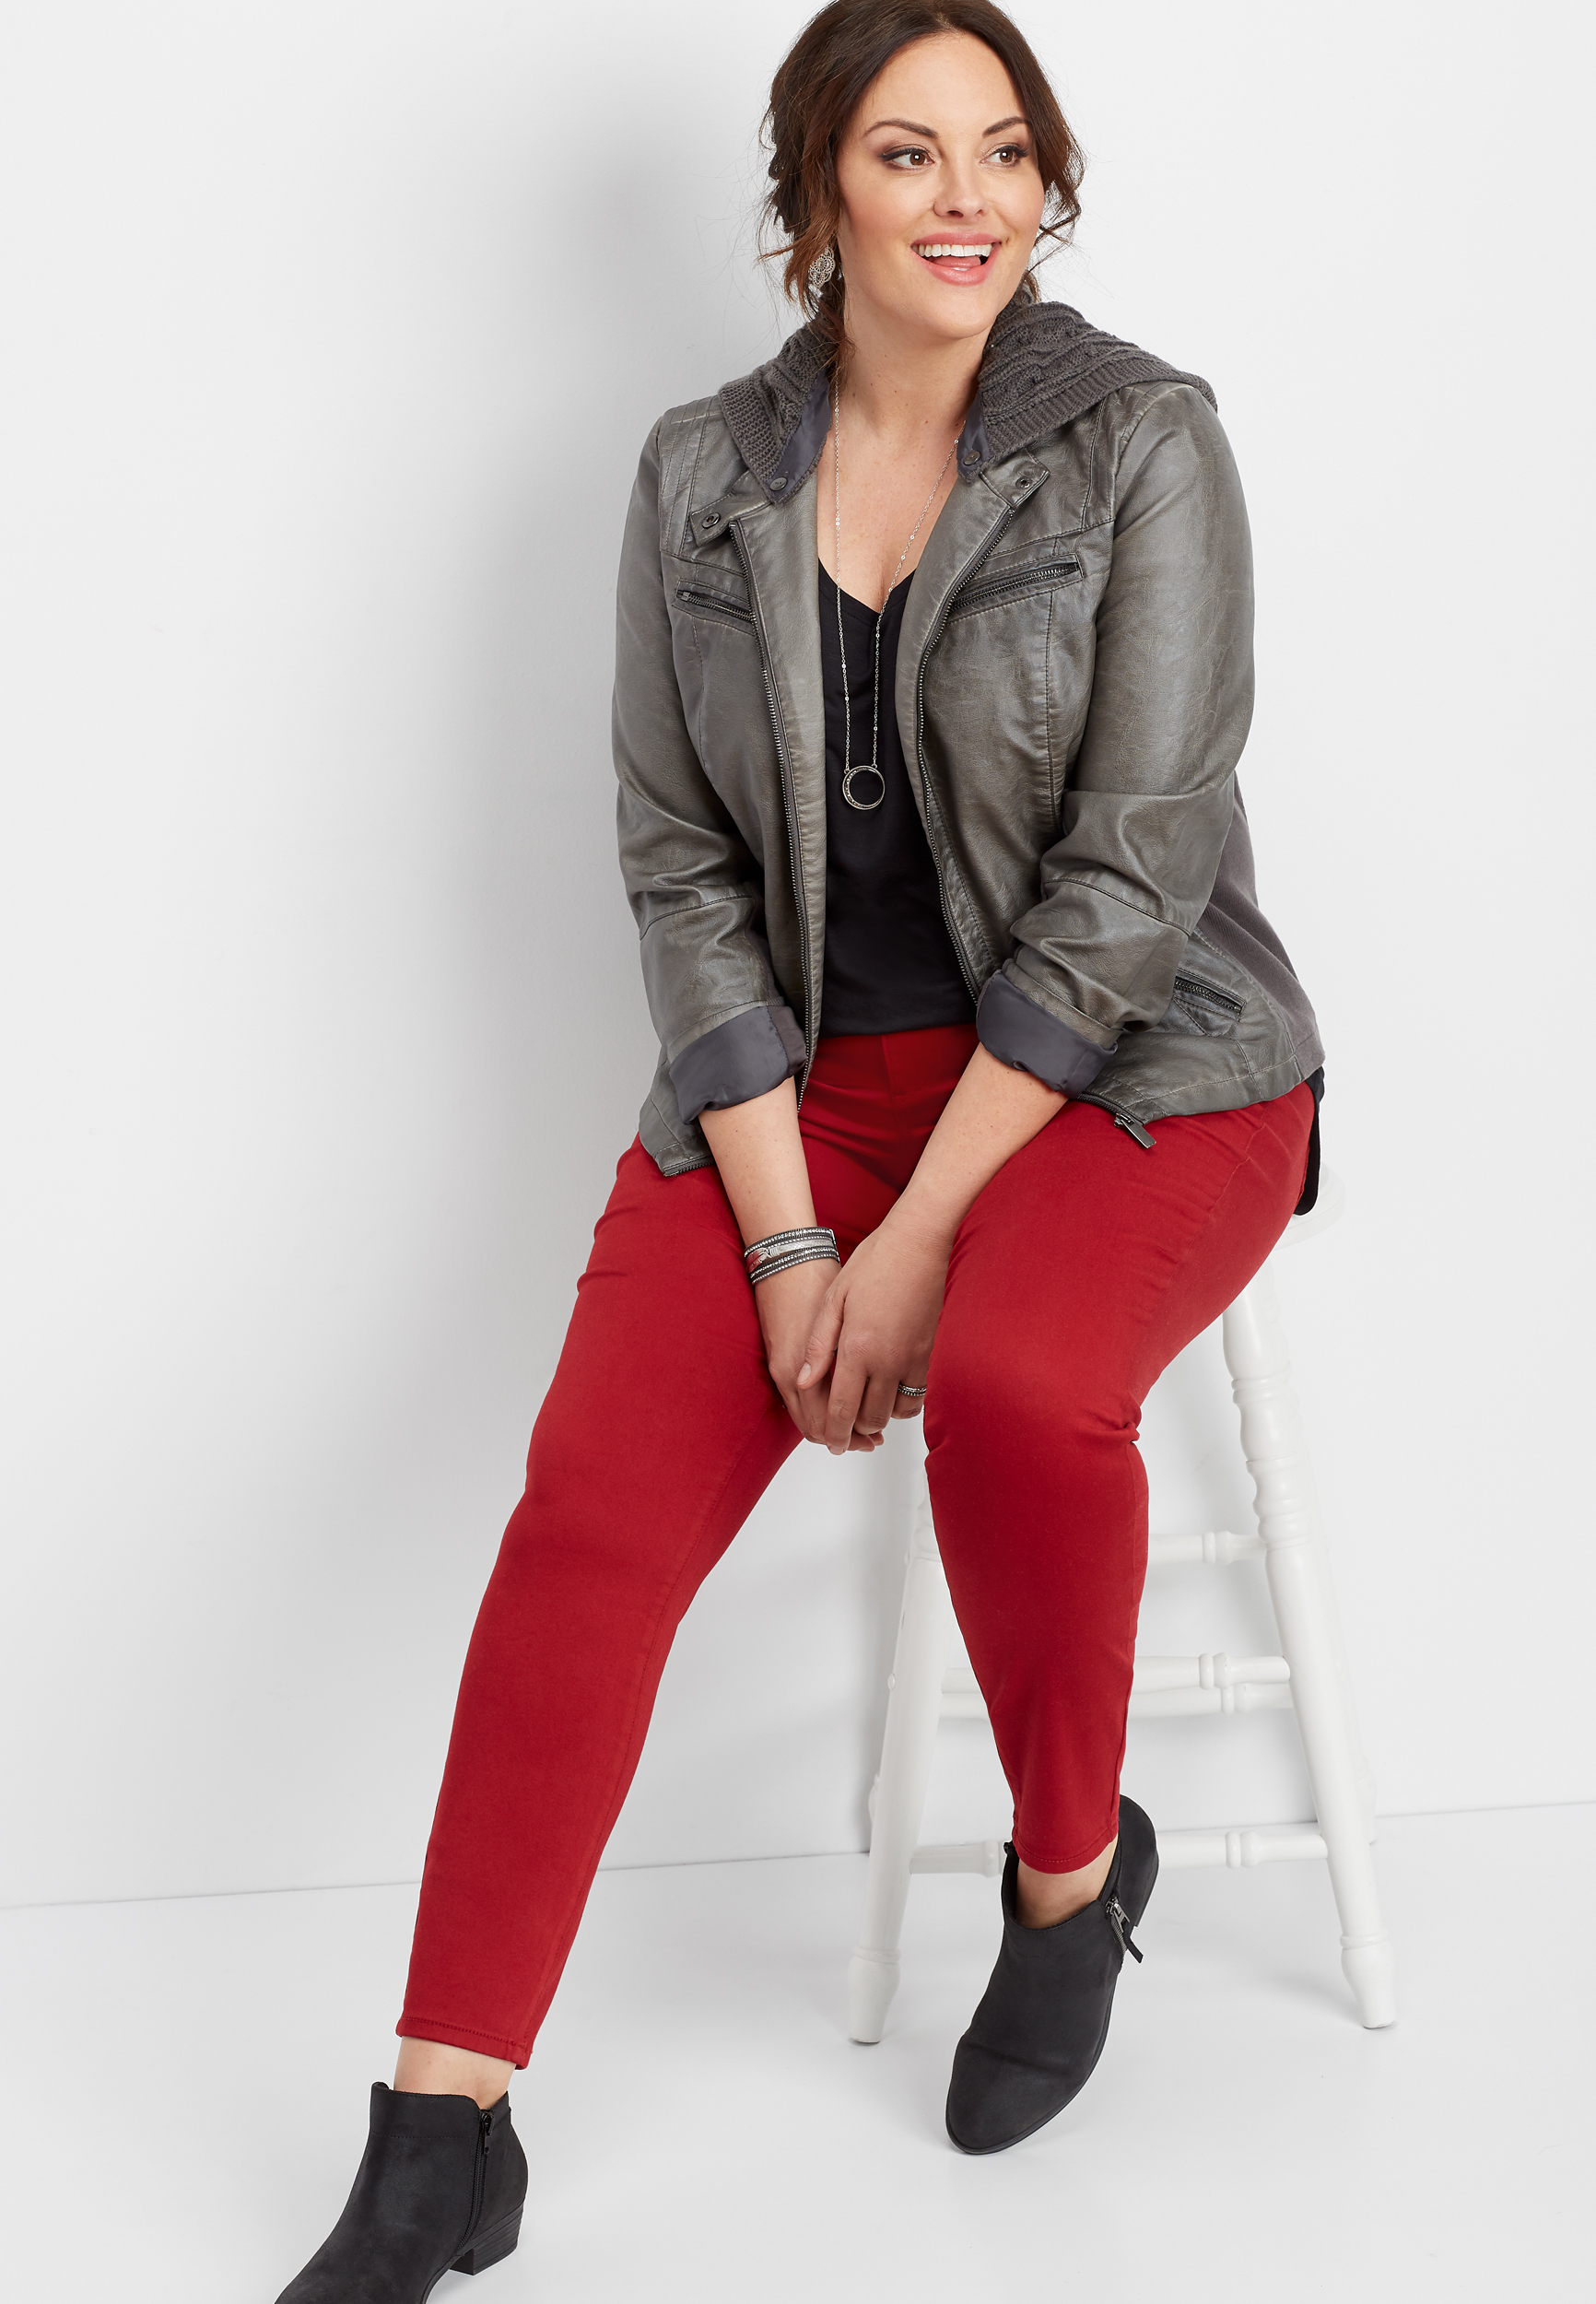 red jeggings plus size